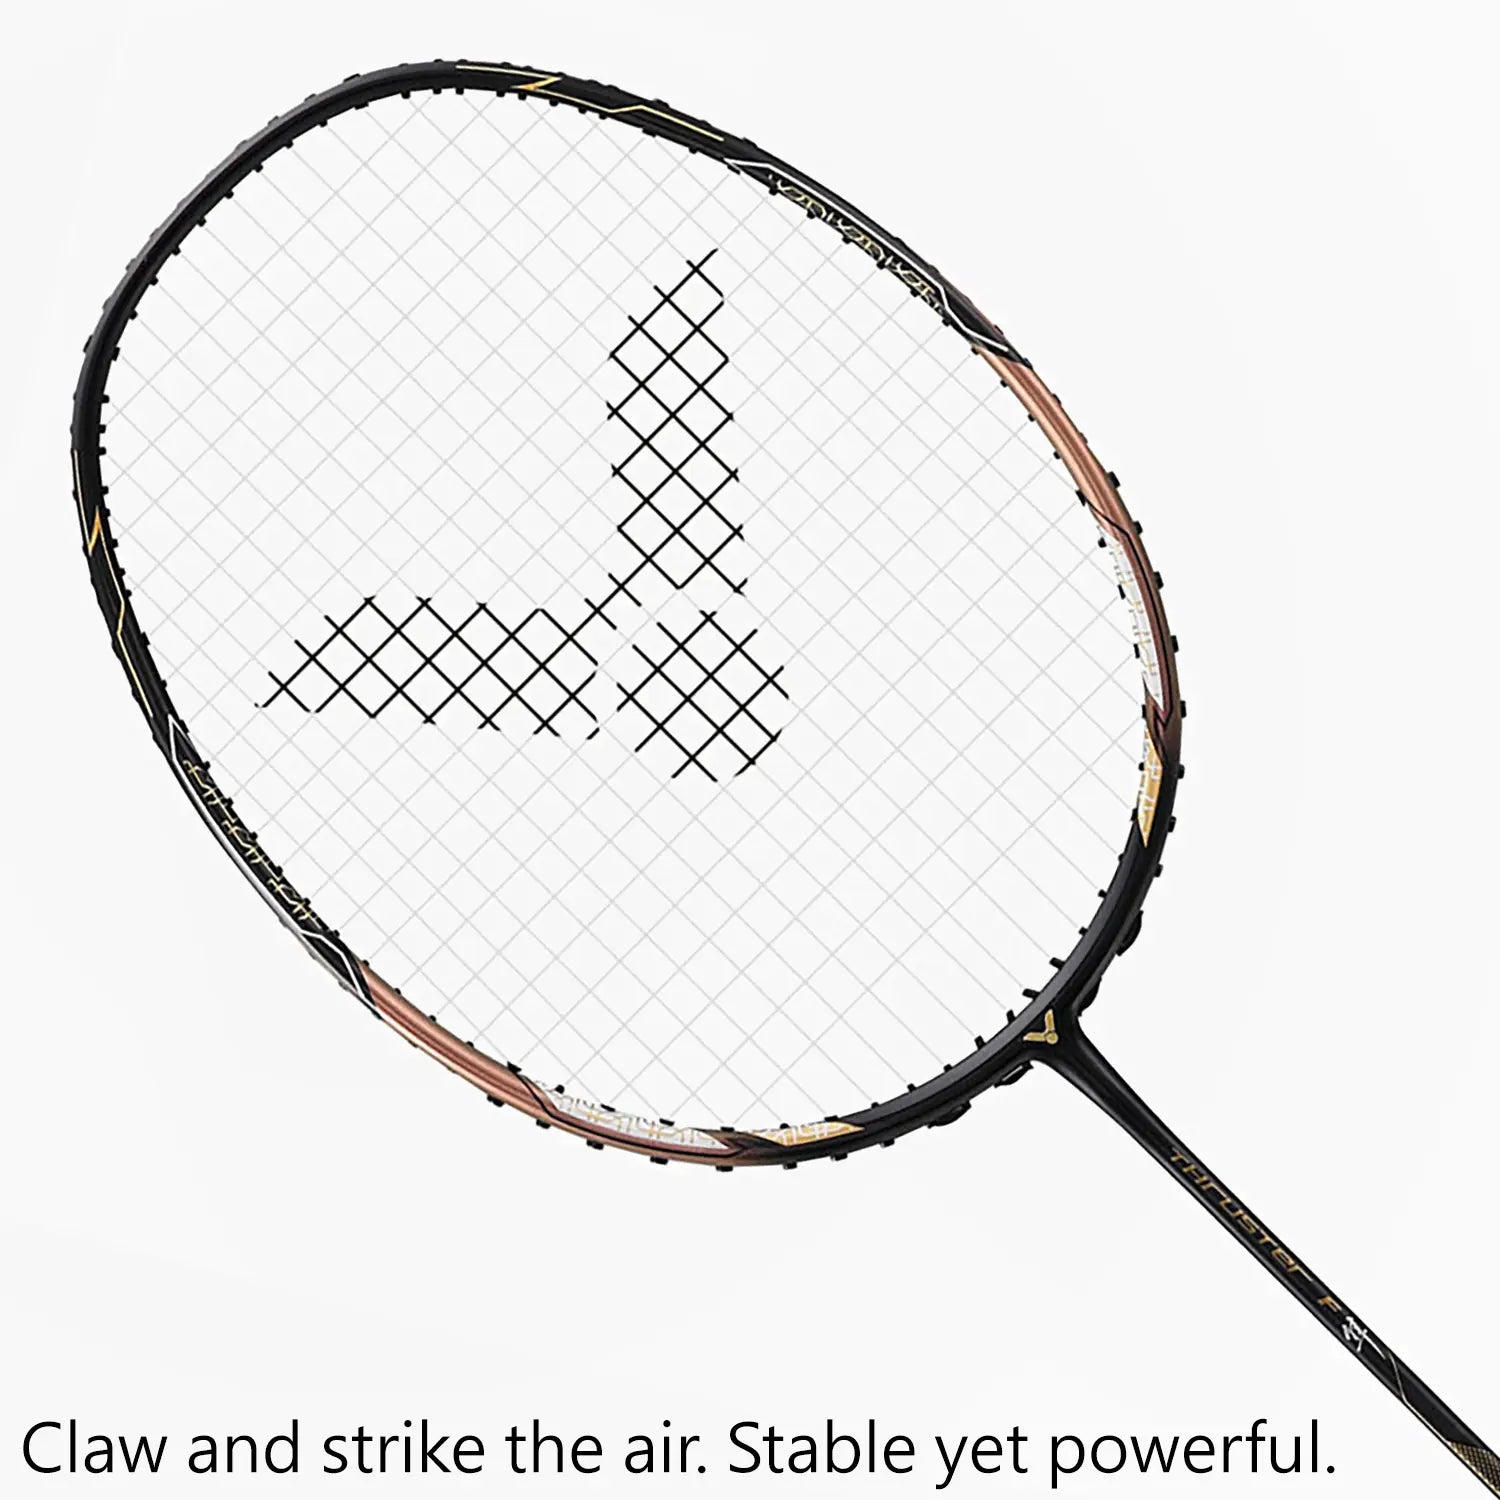 Racket - 150 and up - No protection